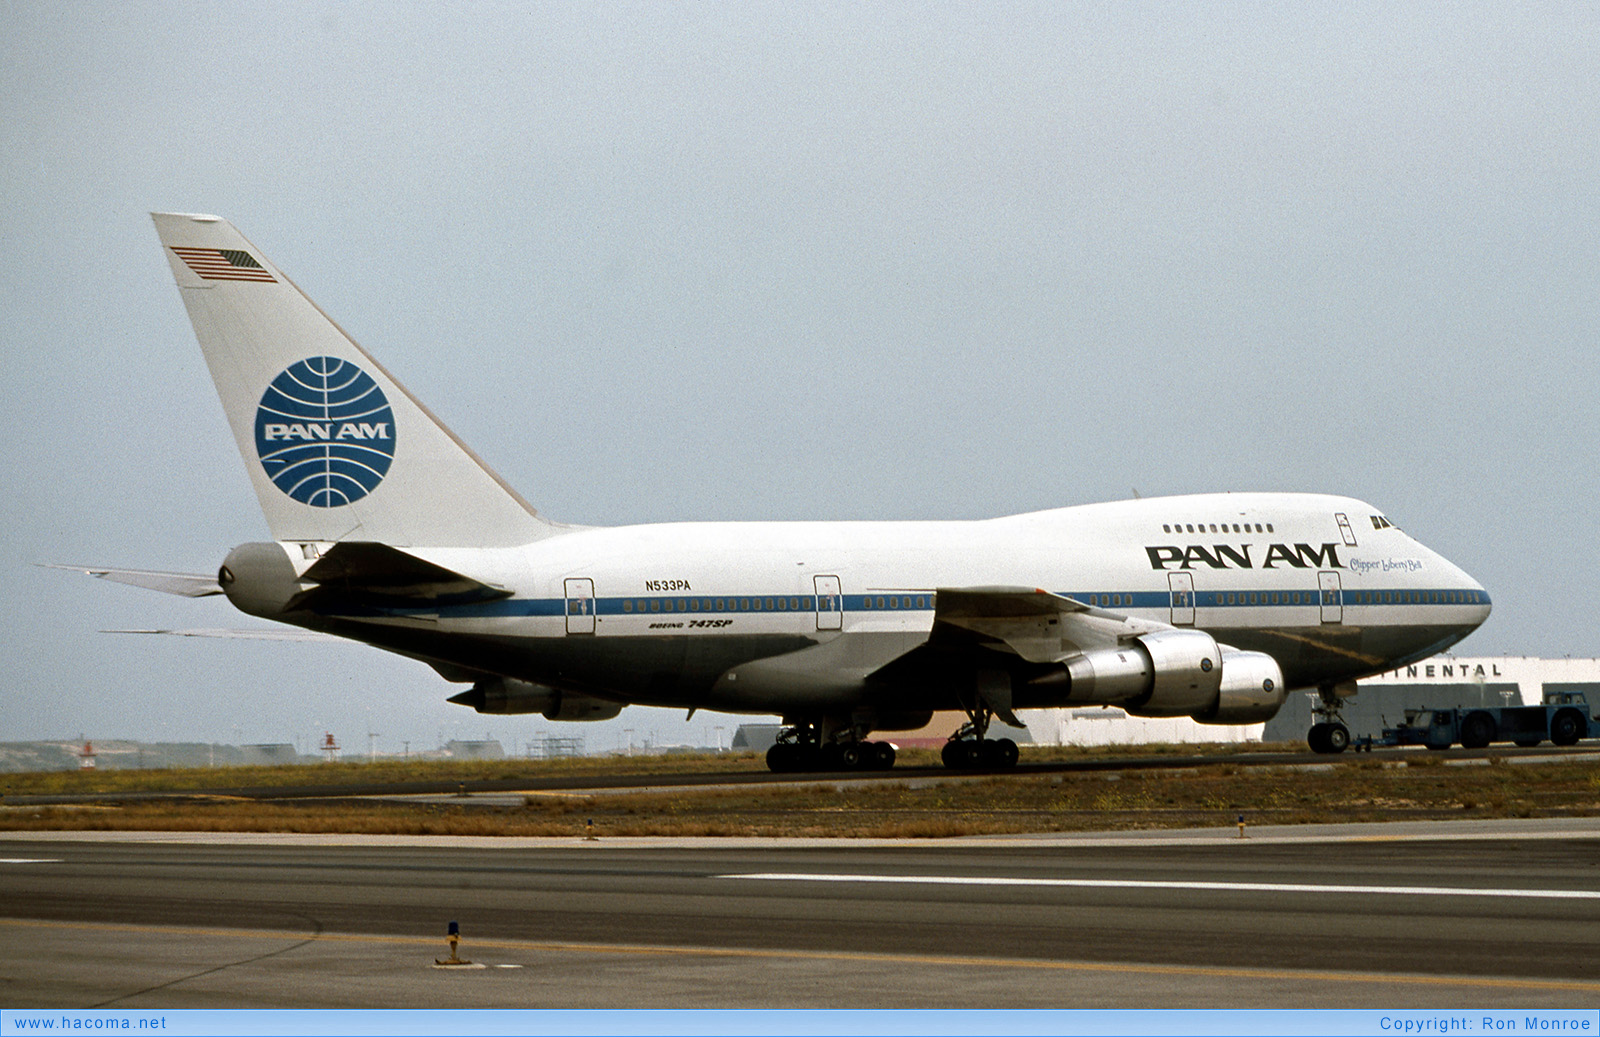 Photo of N533PA - Pan Am Clipper Freedom / Liberty Bell / New Horizons / Young America / San Francisco - Los Angeles International Airport - May 1976